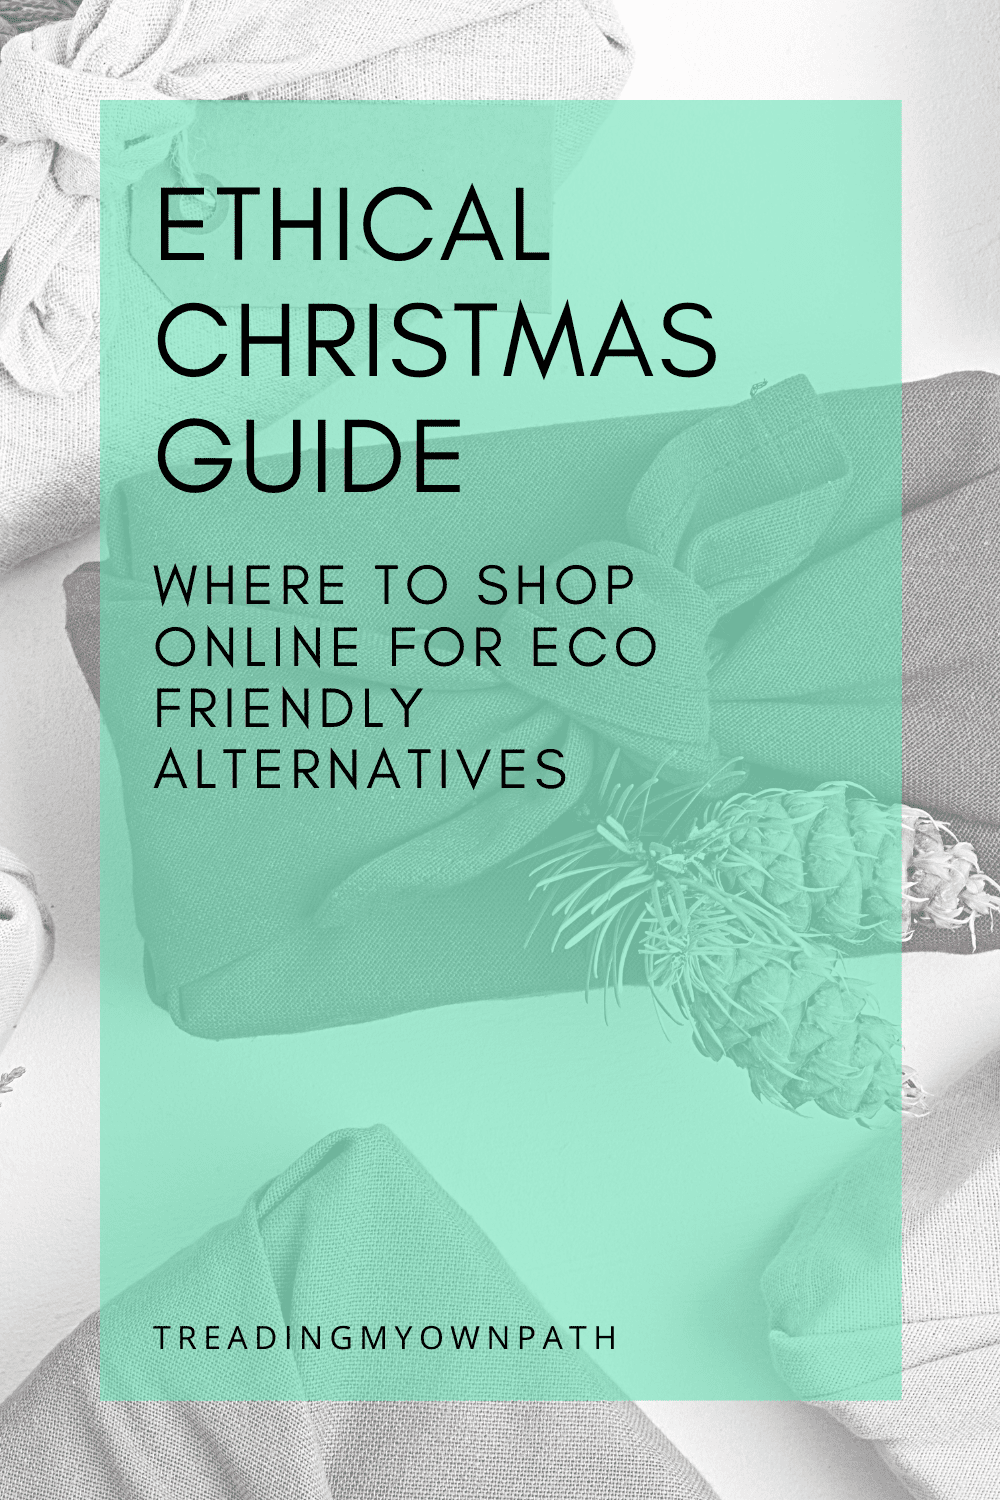 Where to shop online for sustainable gifts that isn\'t Amazon